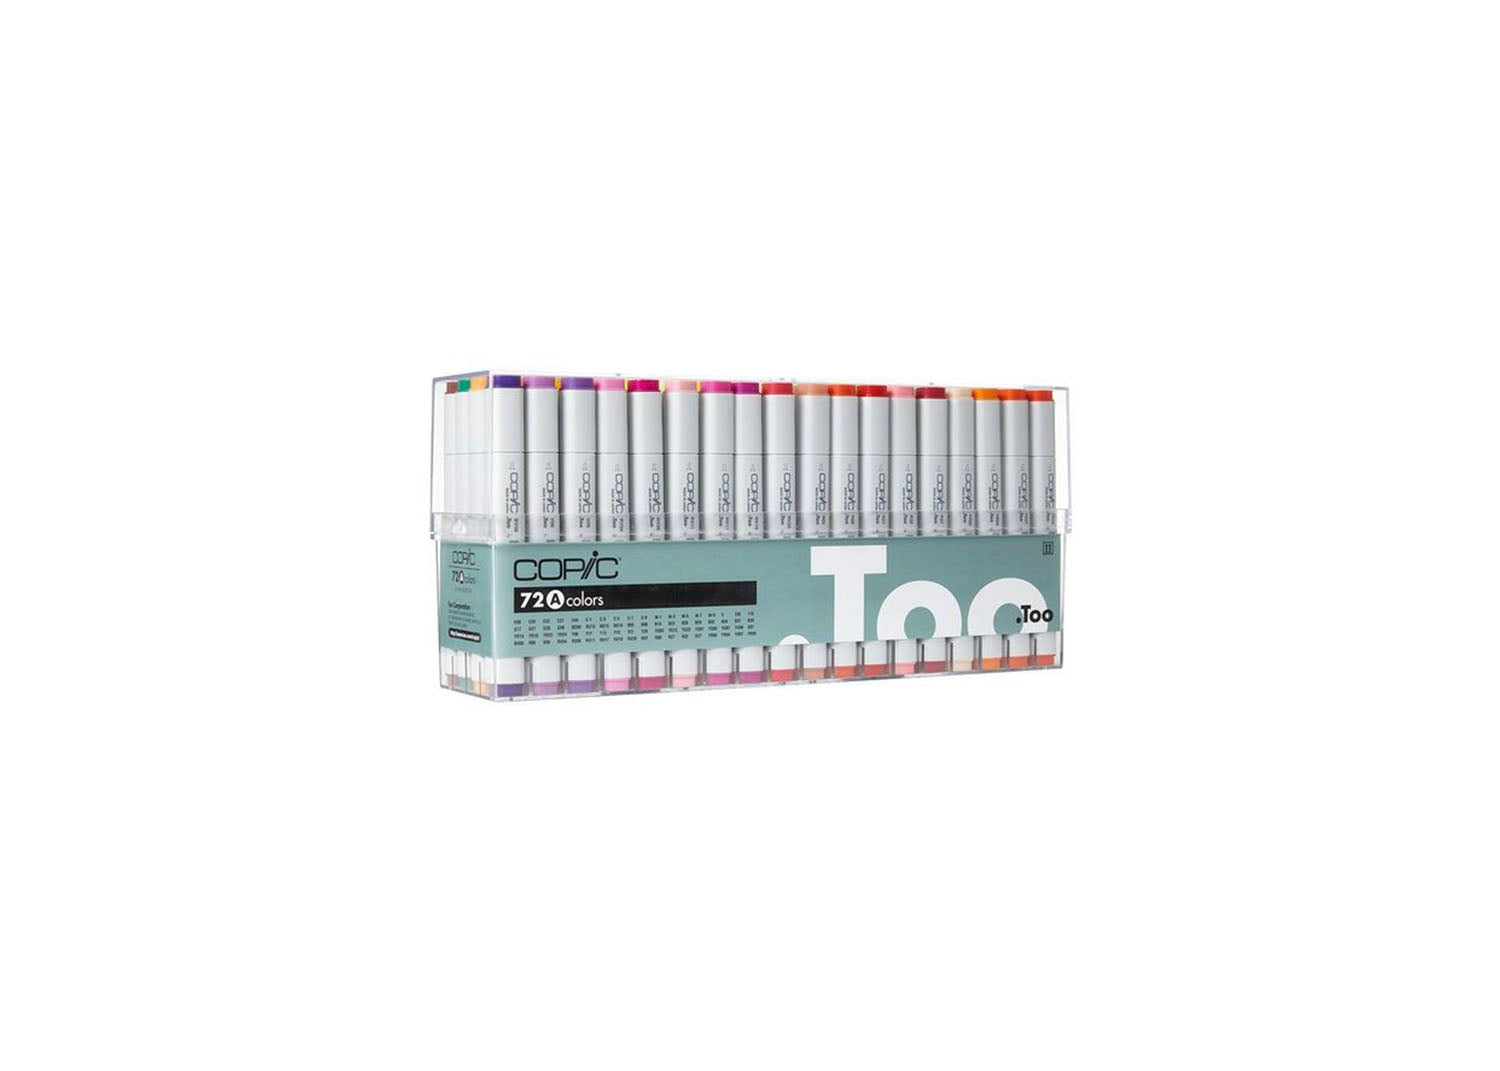 Copic Markers - $377.28